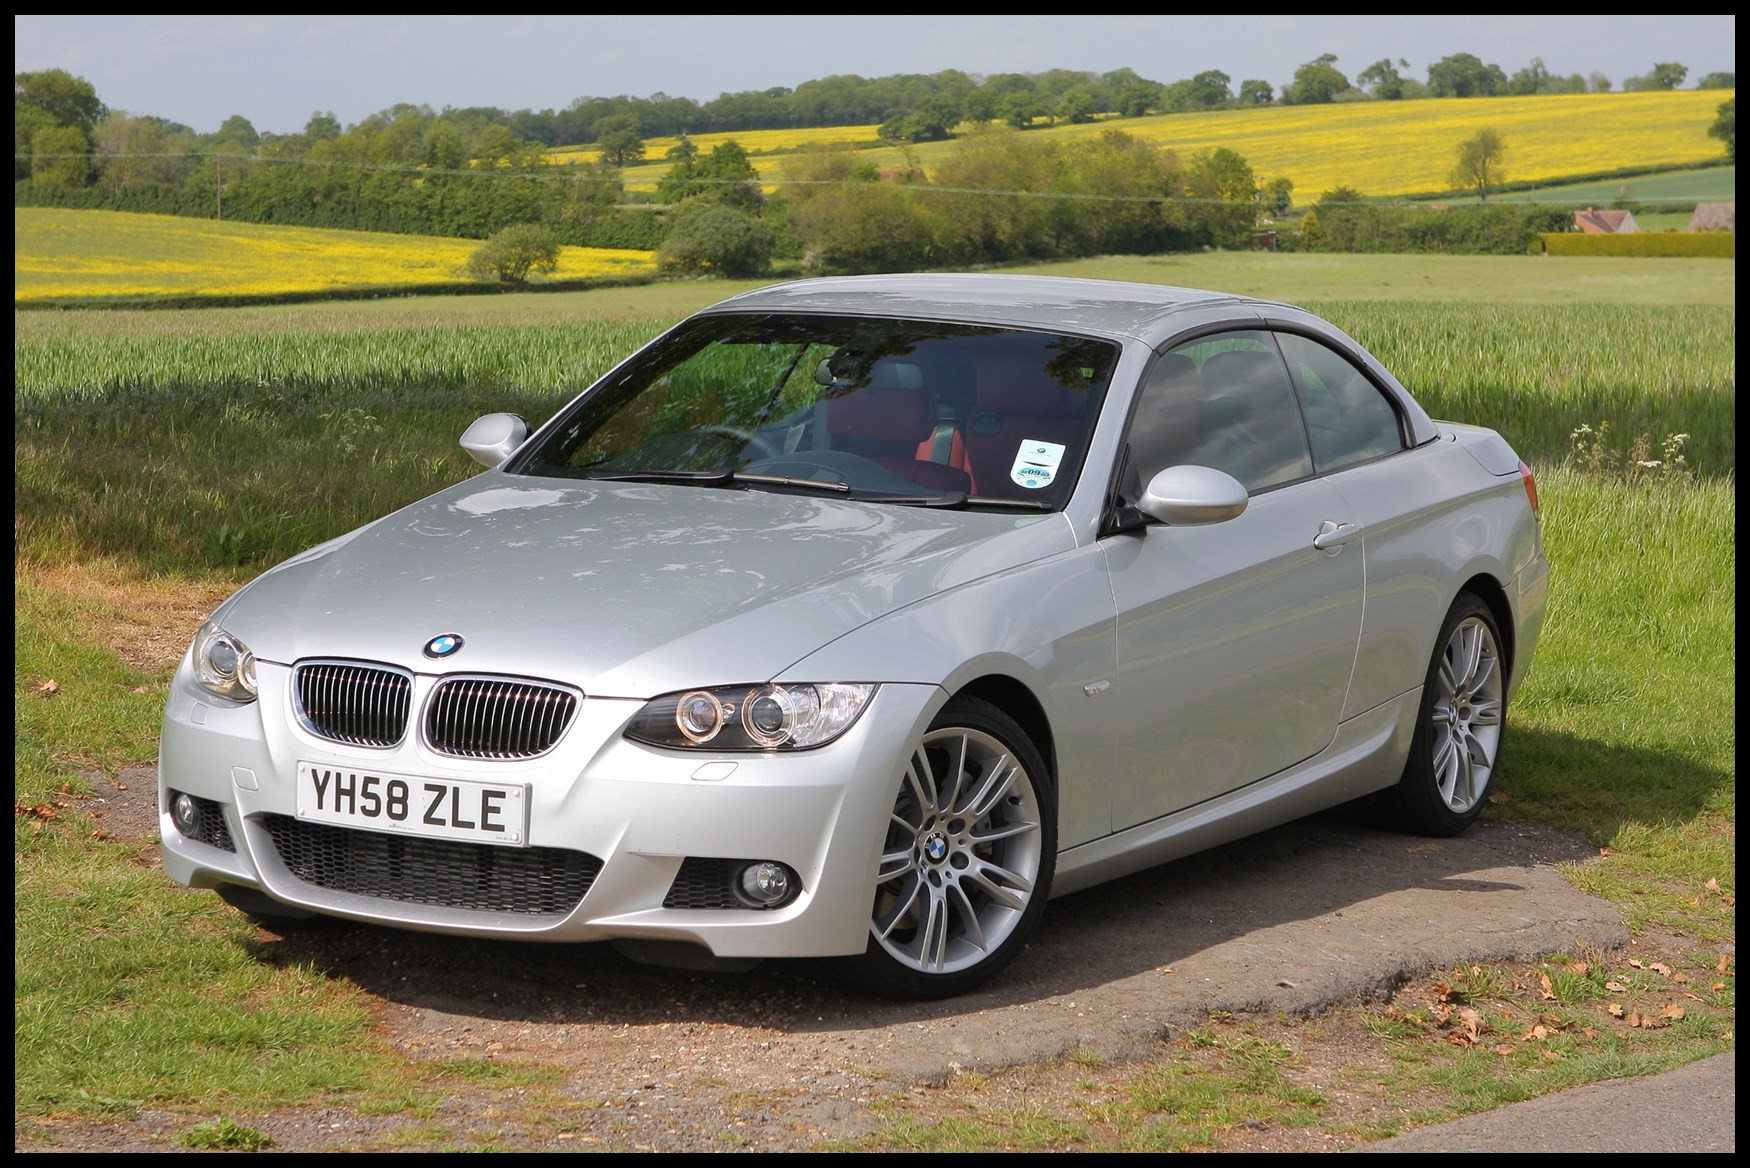 Bmw 3 Series Coupe 2006 for Sale Lovely Bmw 3 Series Convertible Review 2007 2013